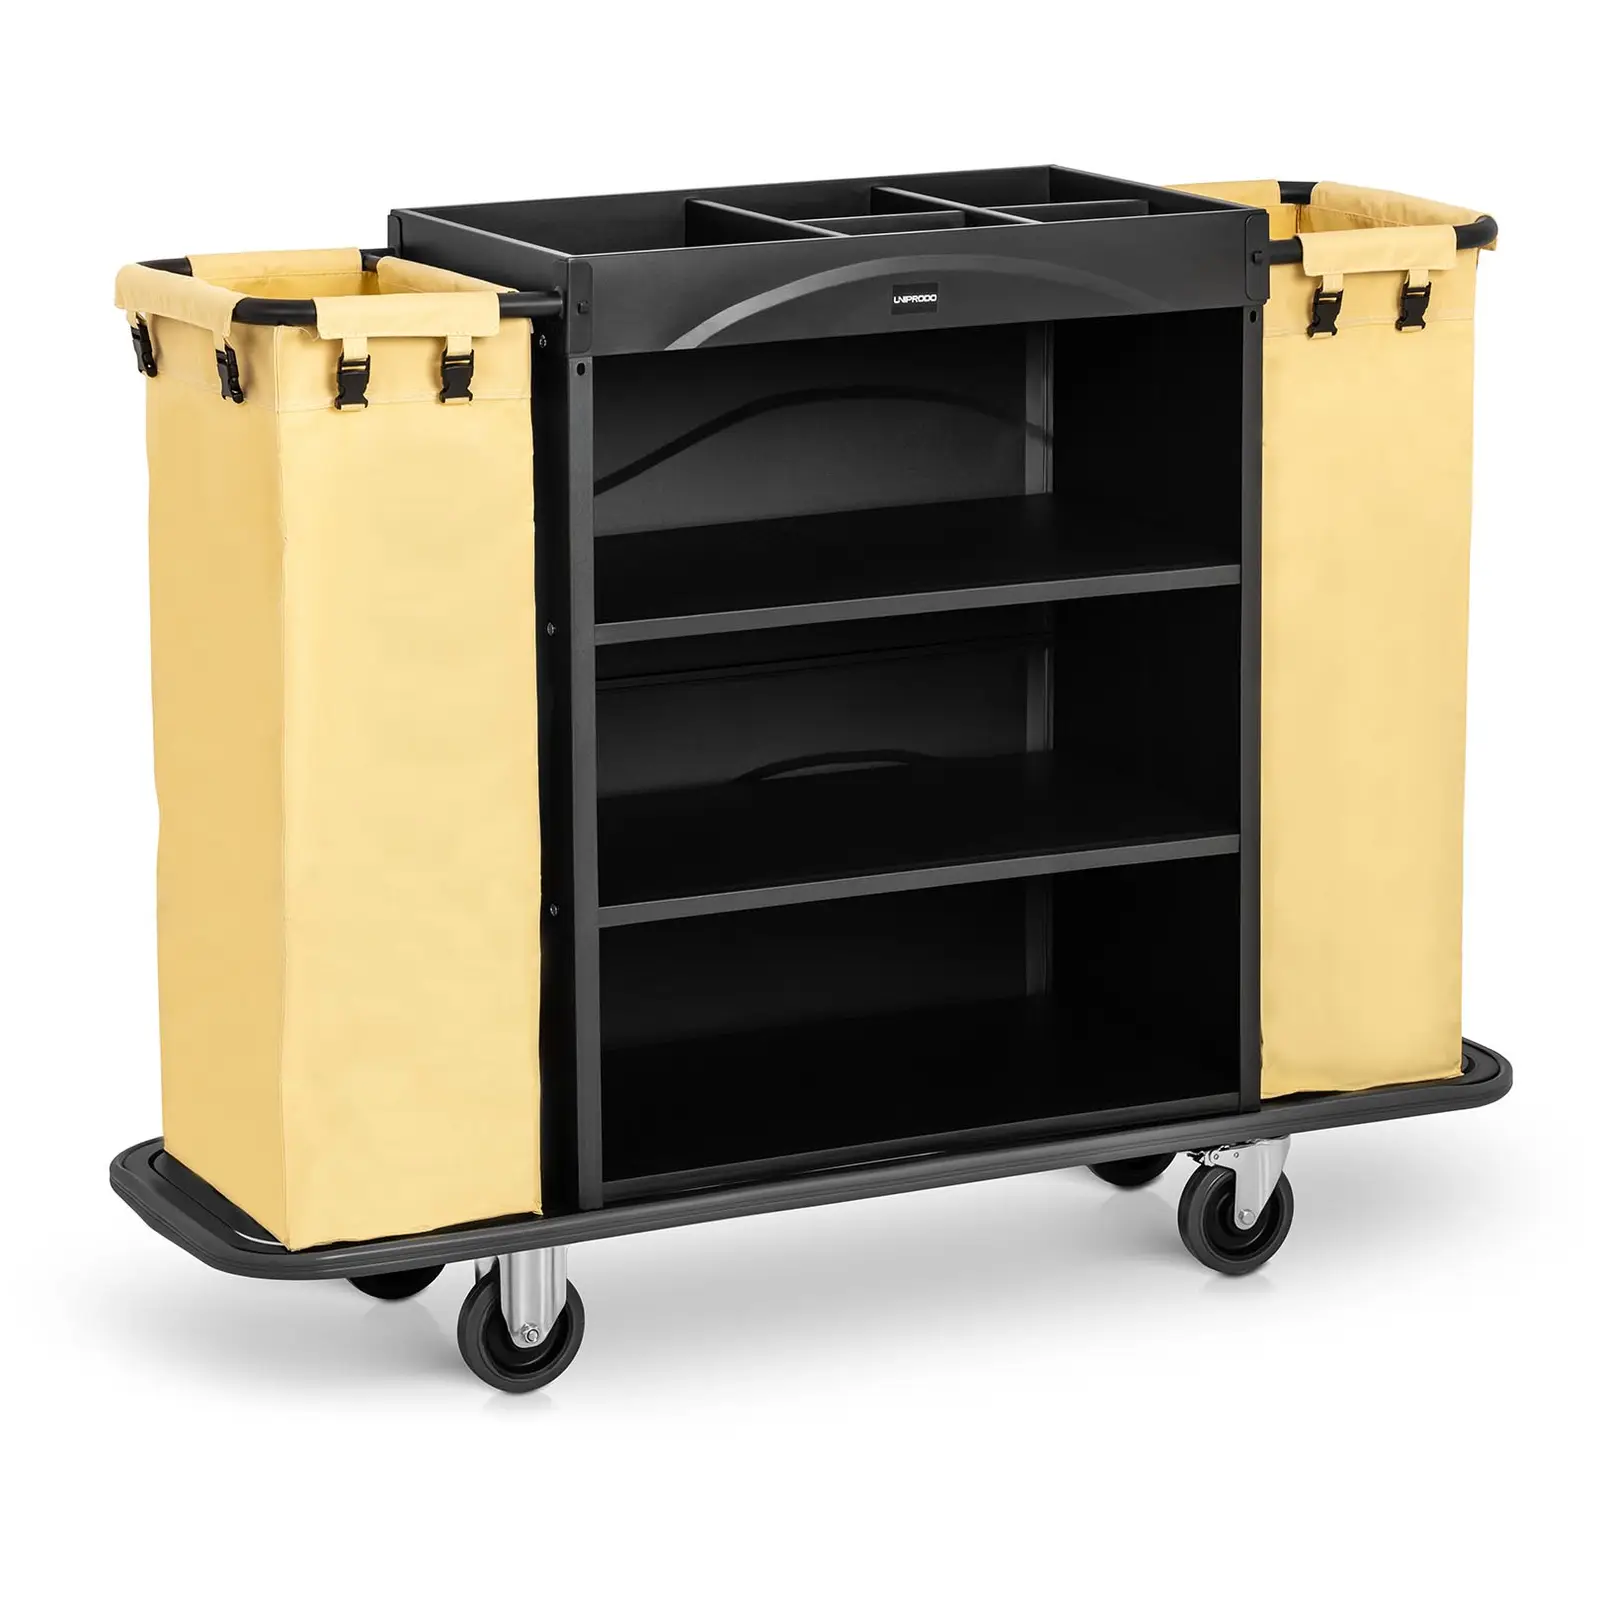 Hotel Service Cart - 150 kg - 2 laundry bags